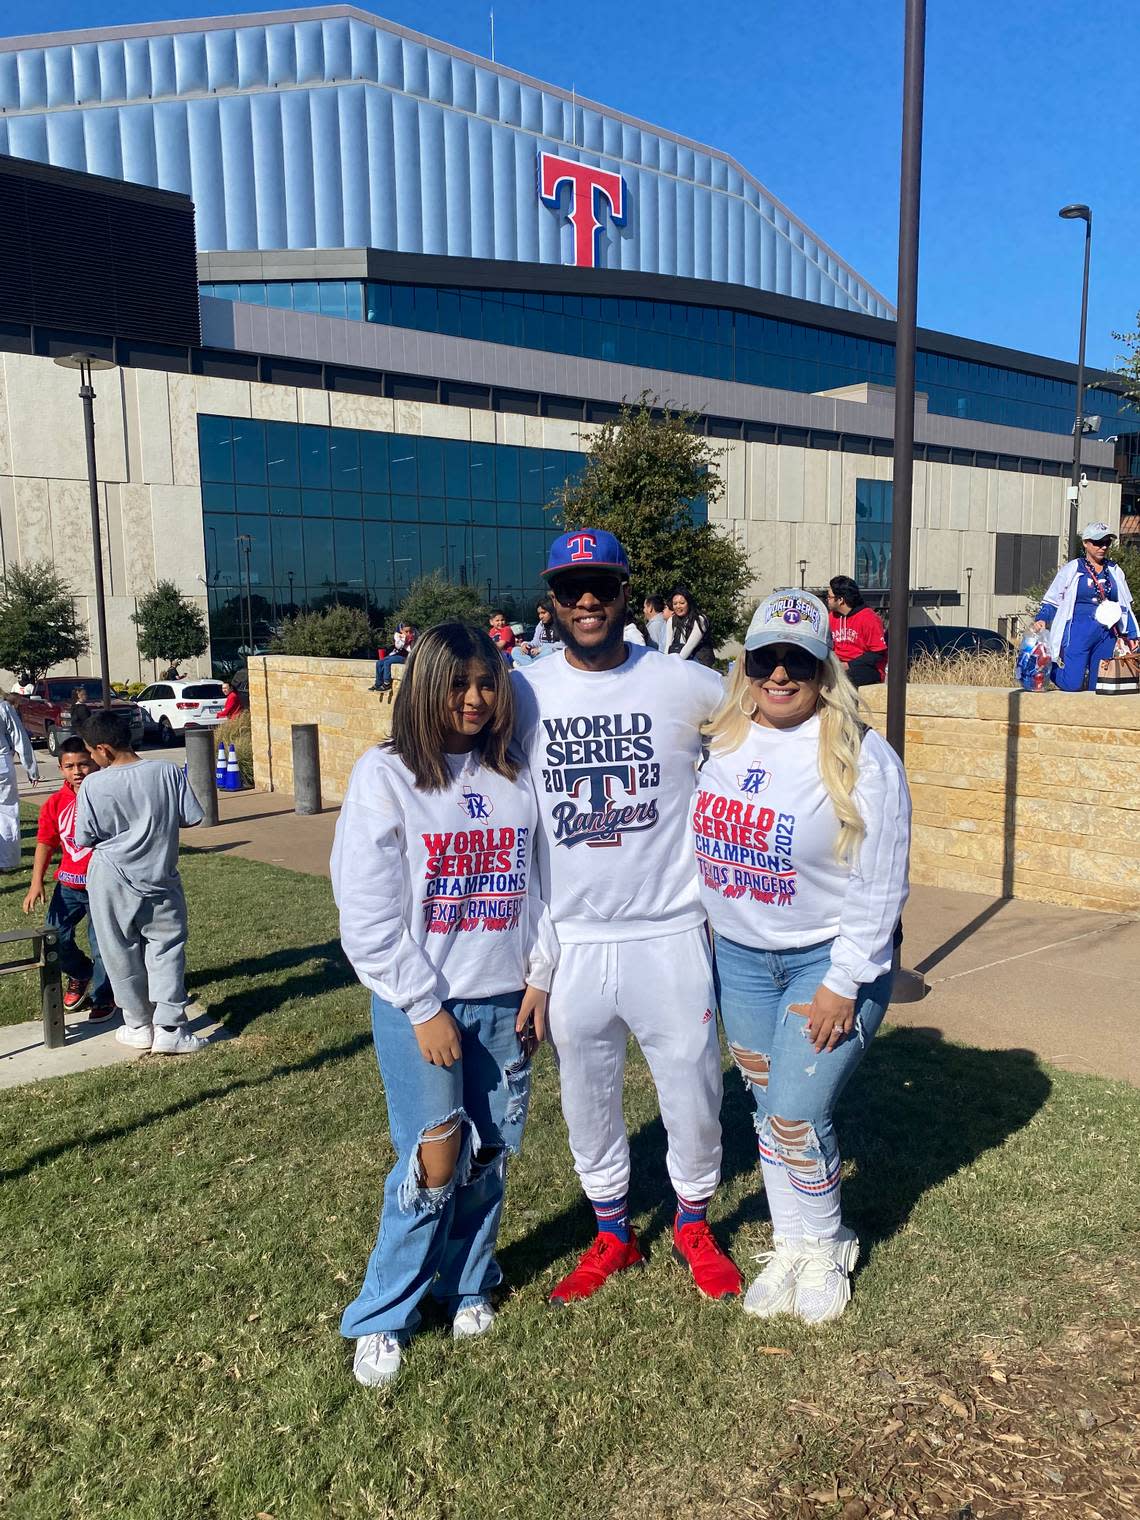 From left to right, Mya, Jay and Vanessa White display sweatshirts they made at home to celebrate the Rangers World Series win. Jenny Rudolph